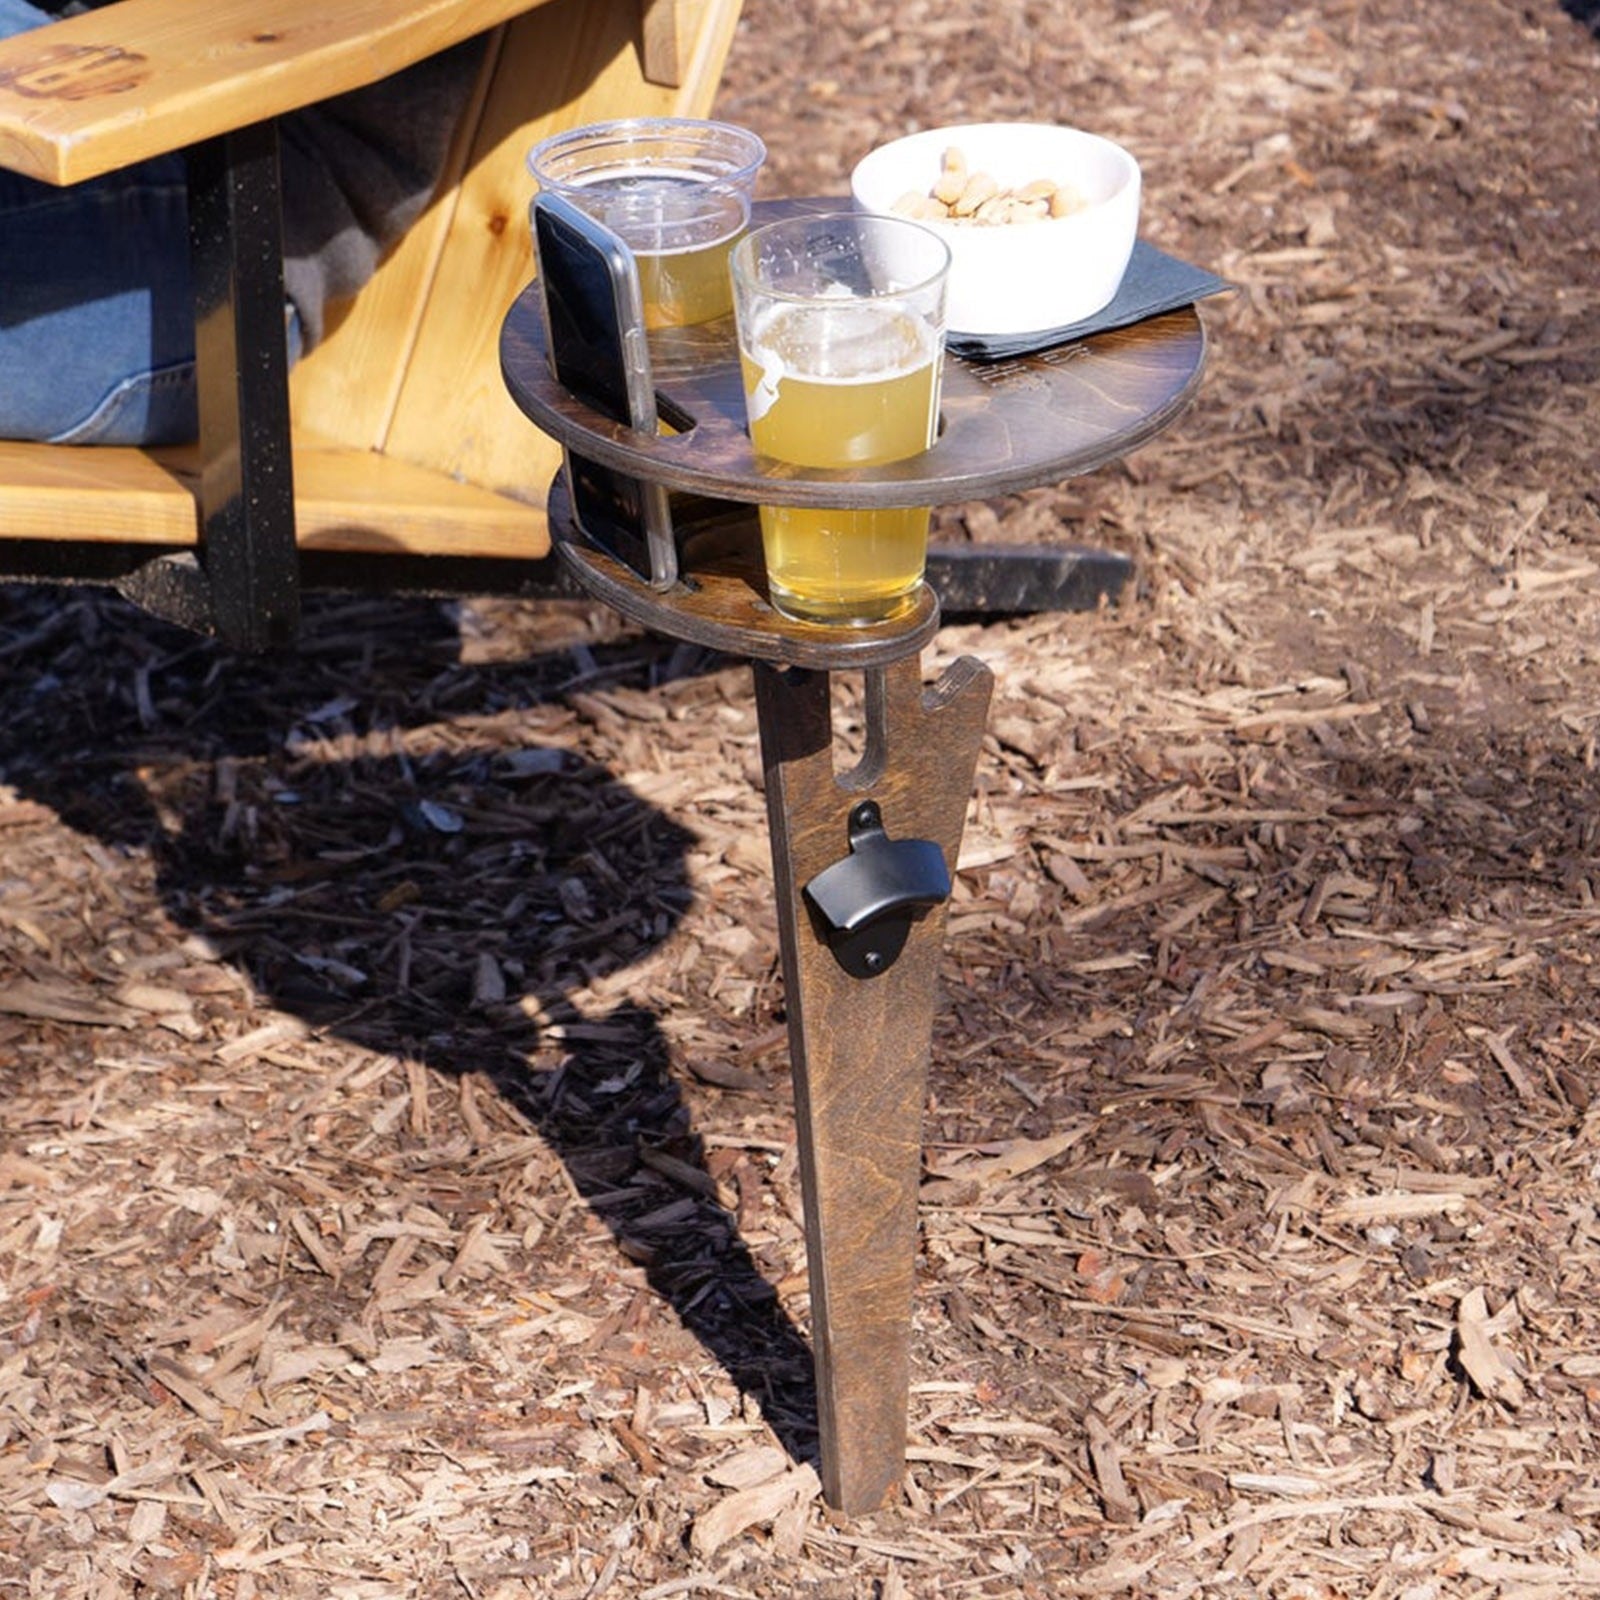 Portable Beer Wine Table with Foldable Round Desktop - Find Epic Store